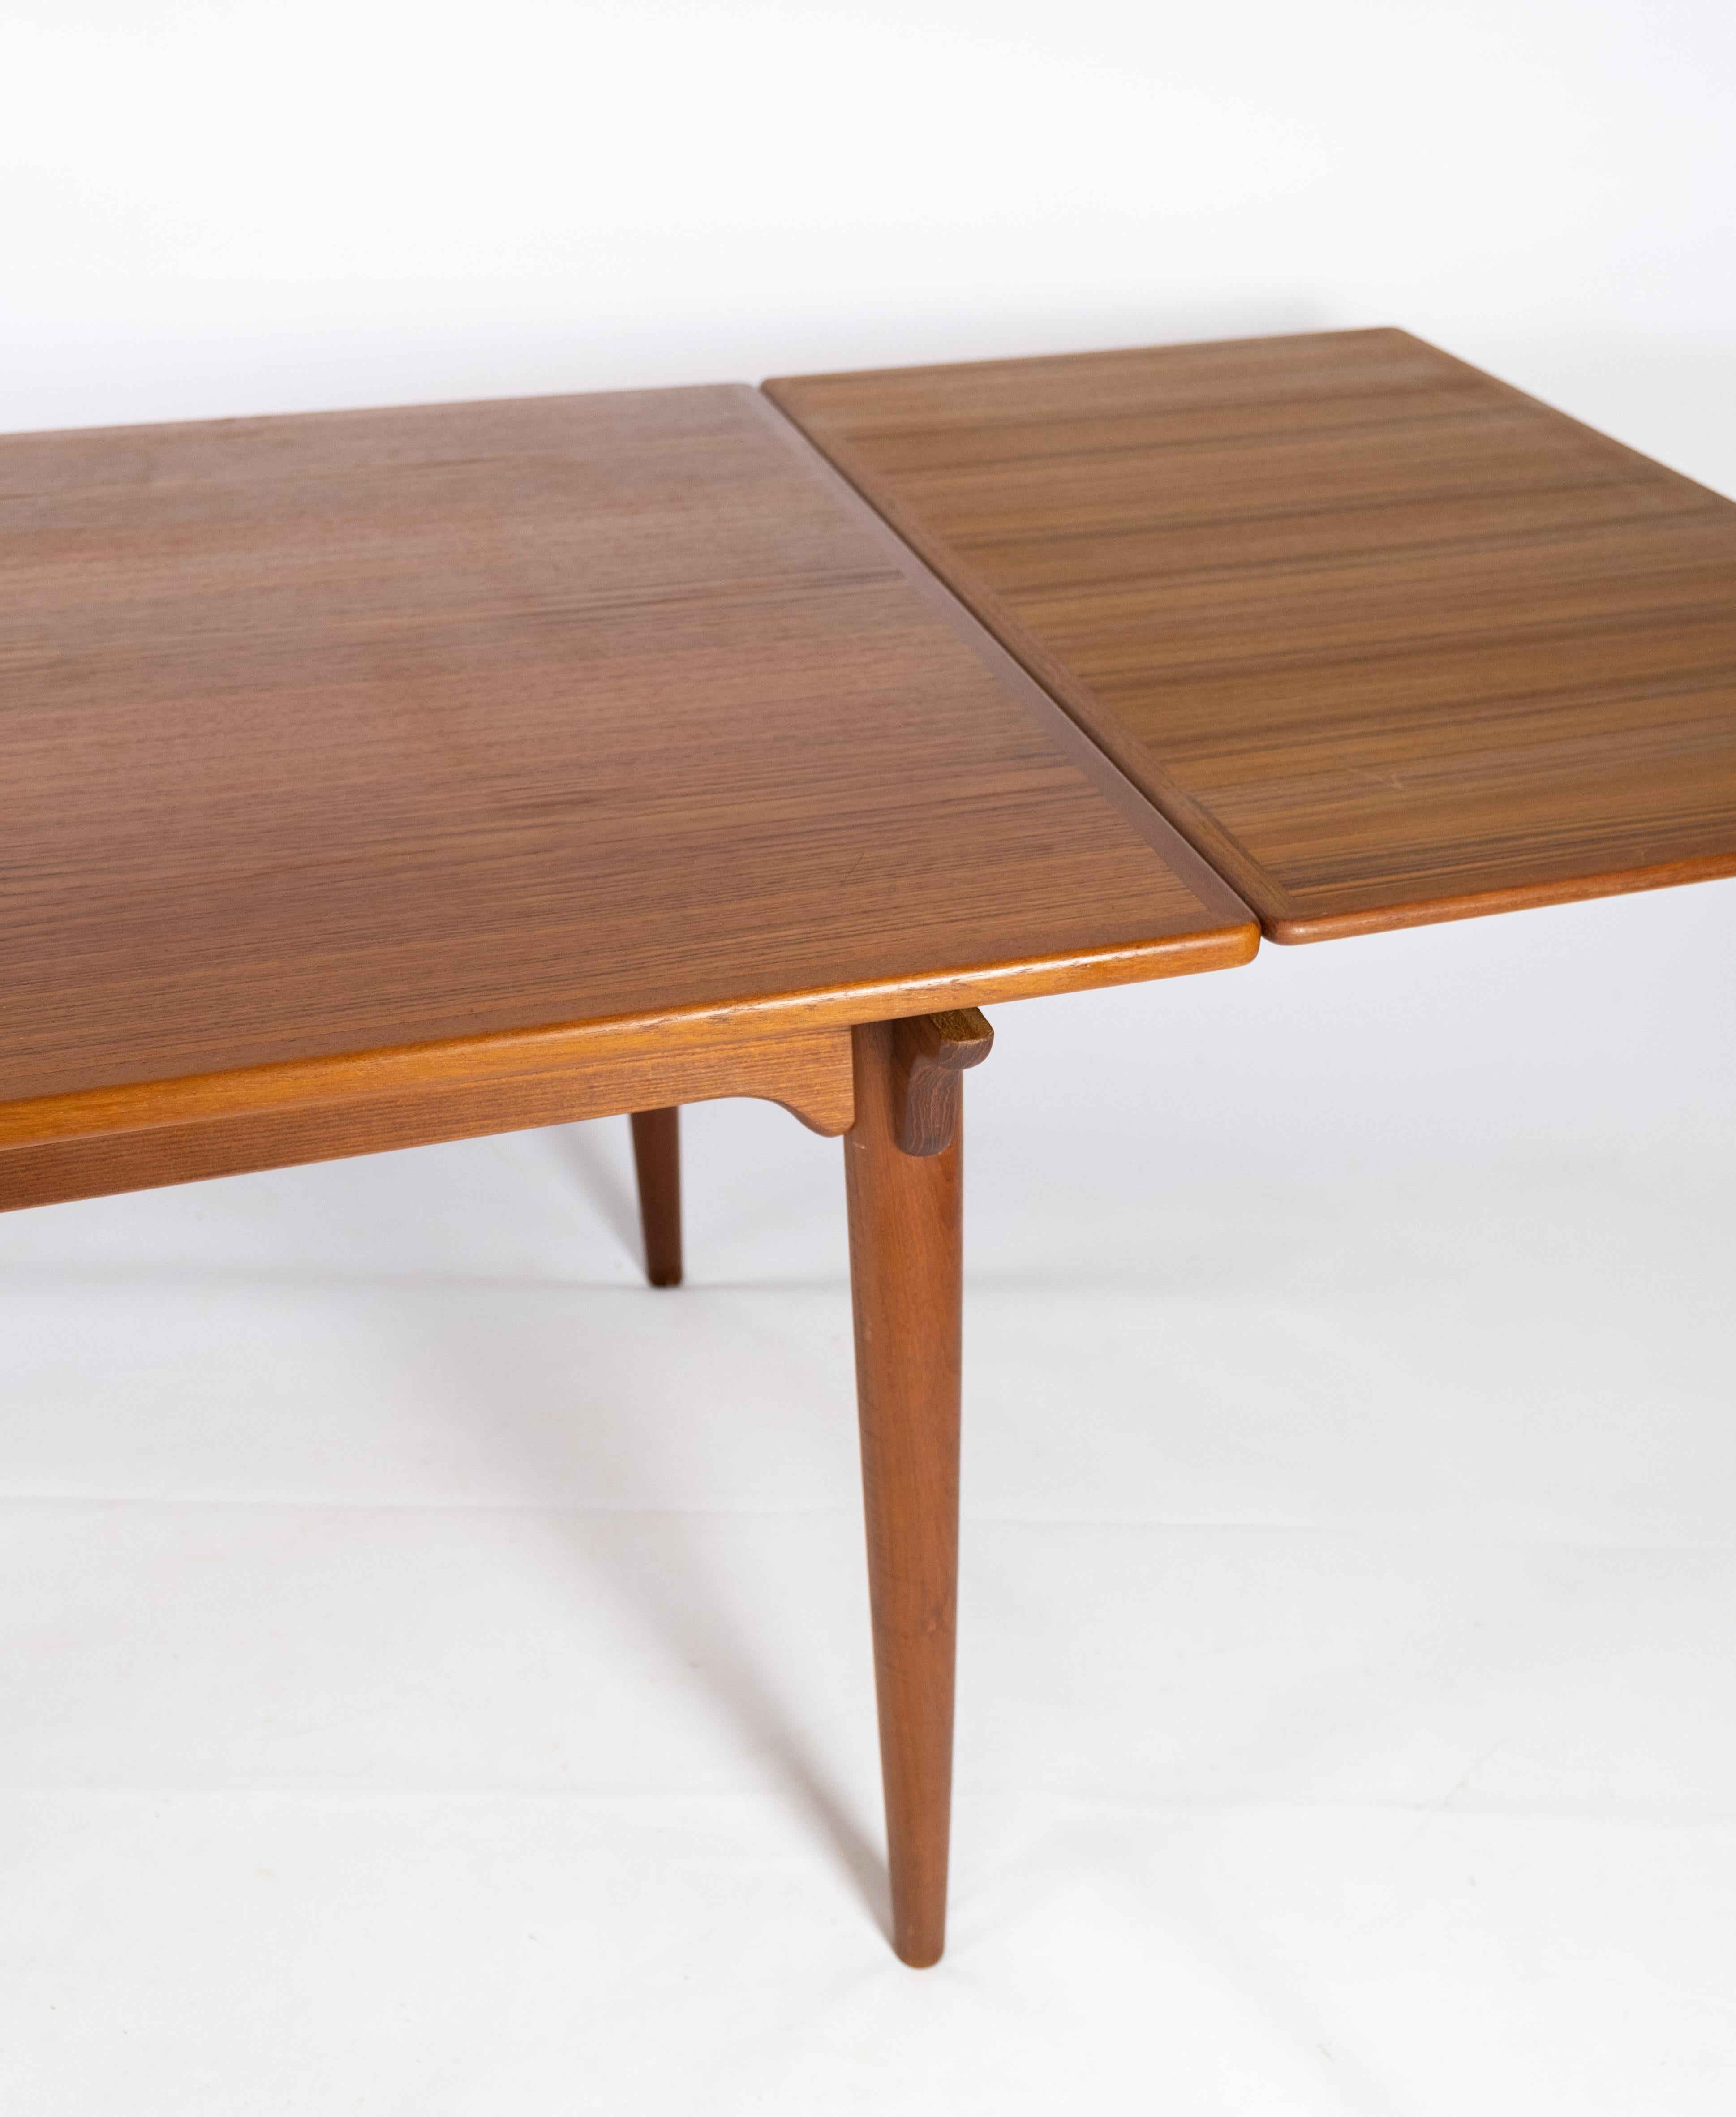 Dining Table Made In Teak With Extentions, Danish Design From 1960s For Sale 6